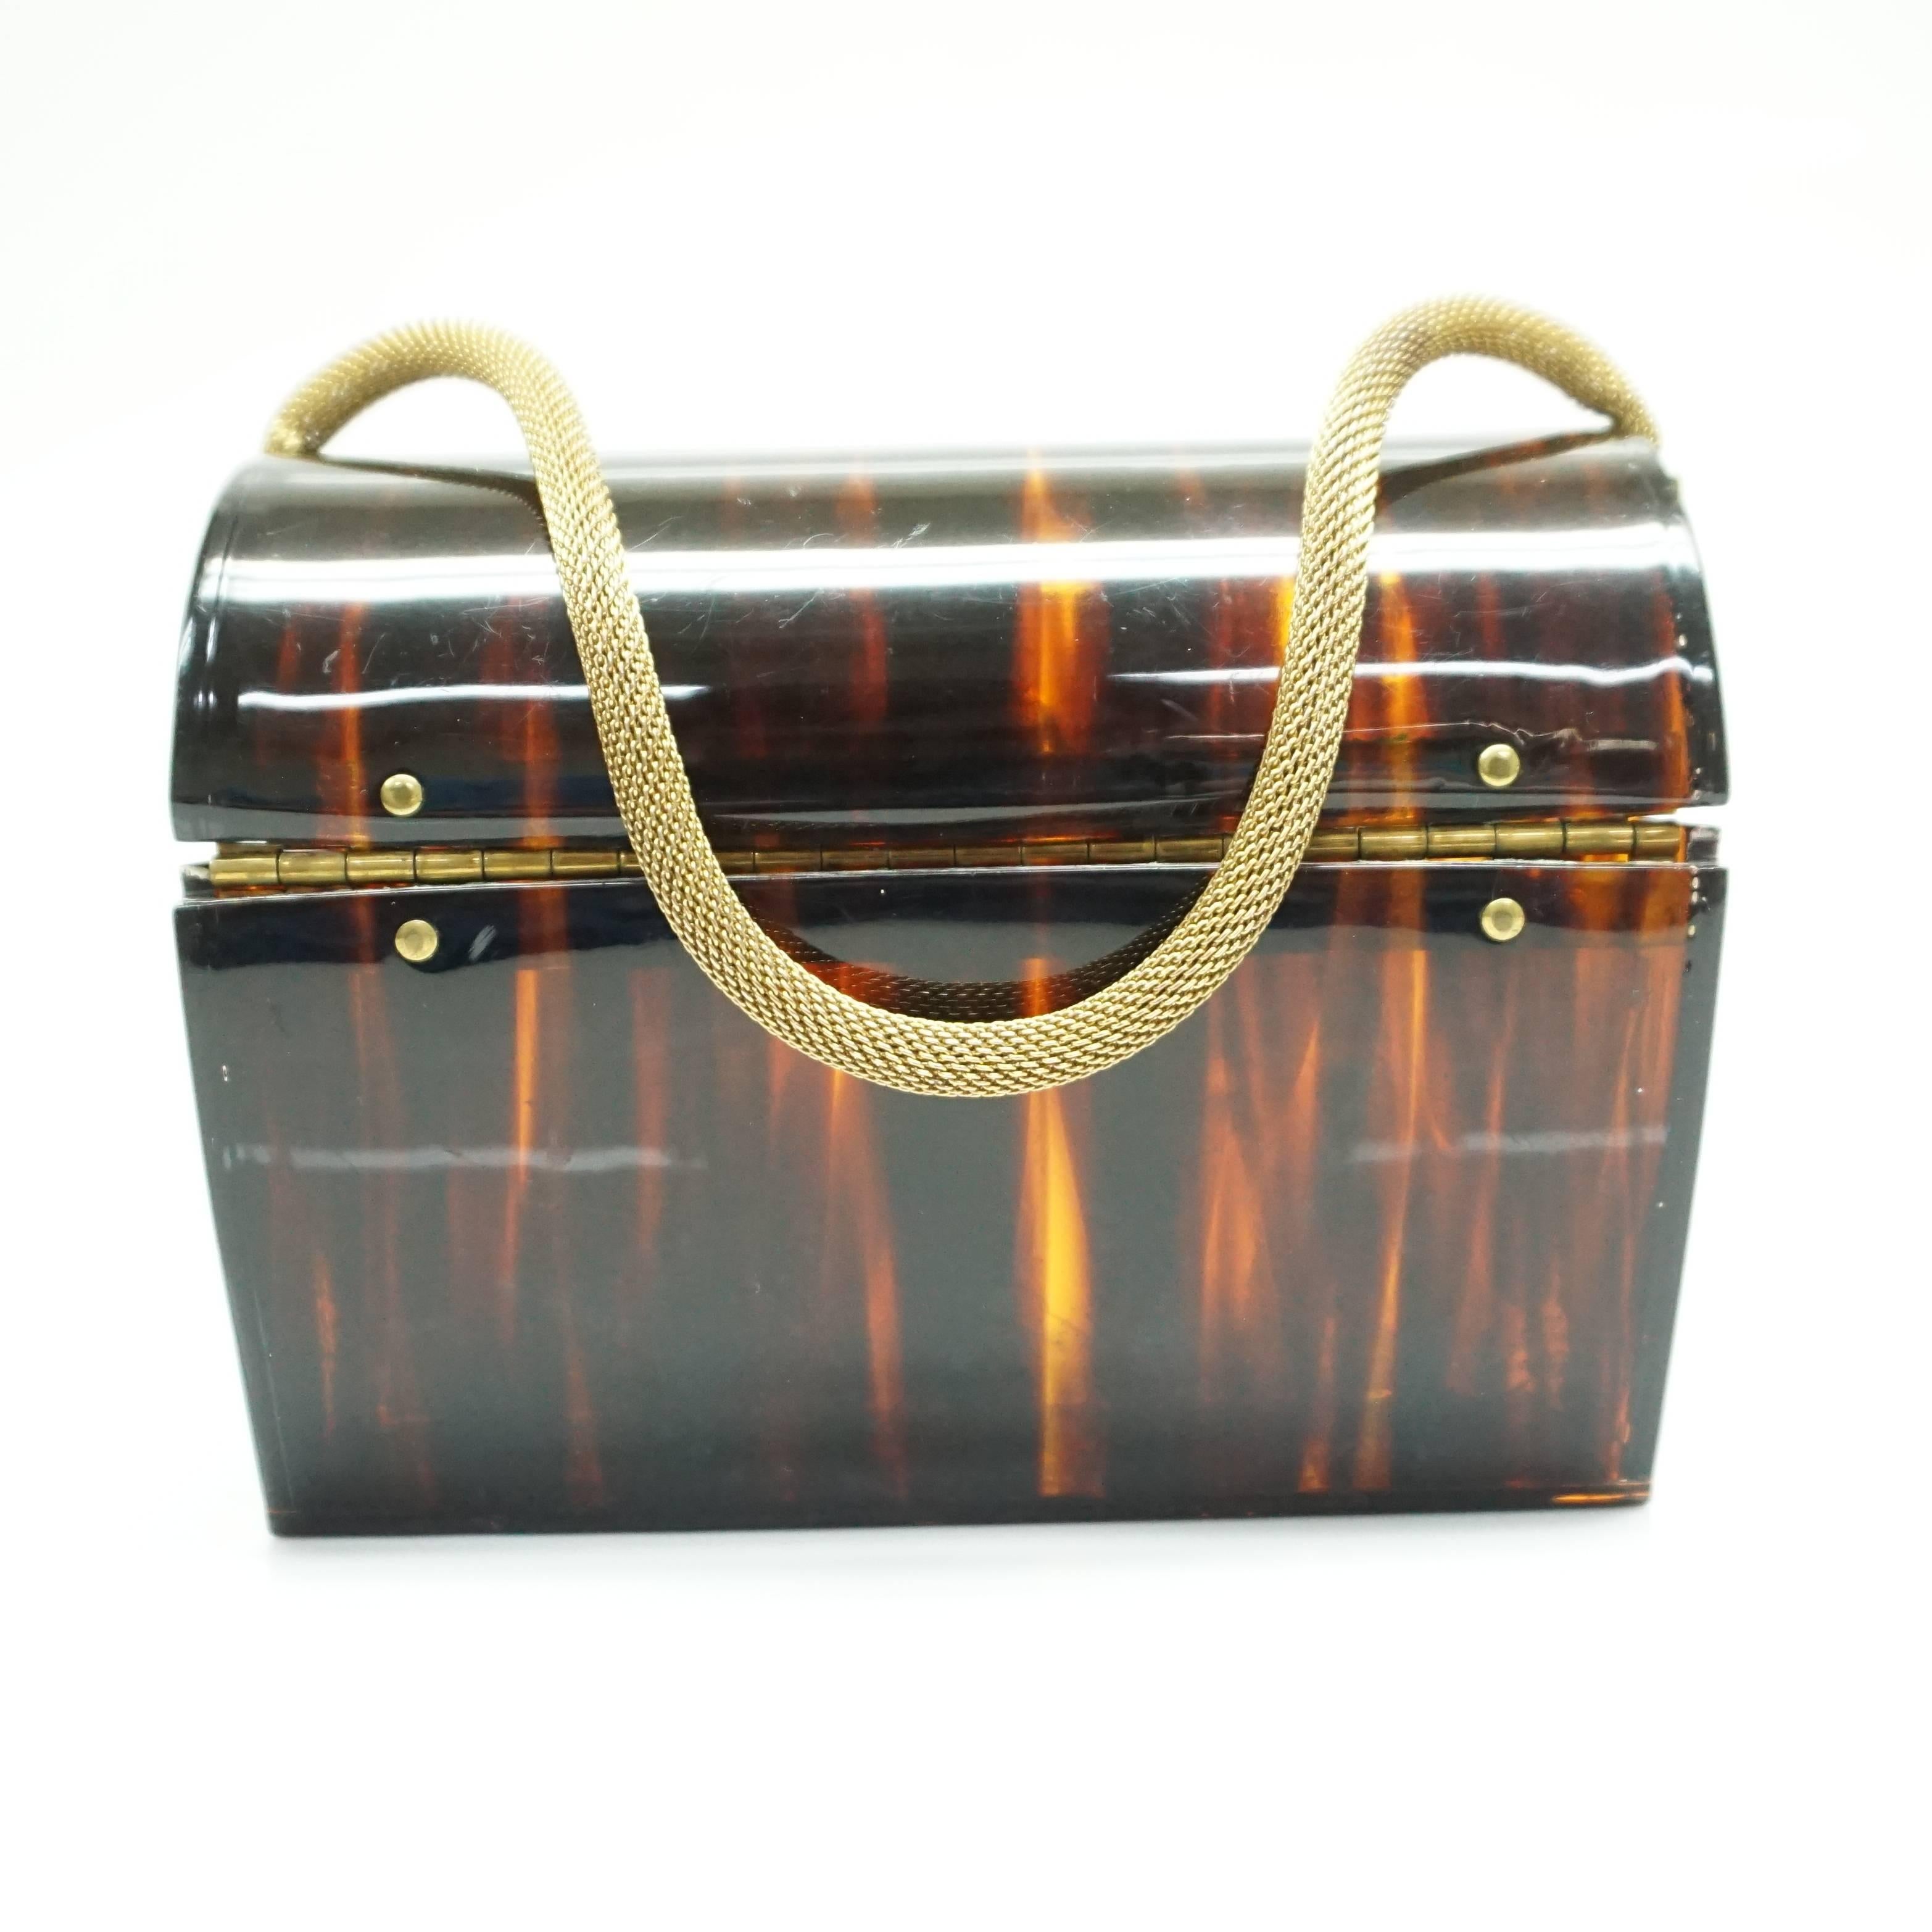 Wilardy Tortoise Lucite Handbag - Circa 60's  This spectacular tortoise lucite handbag has one main compartment. Has a gold round metal mesh strap and a front circular lucite with gold trim closure. The bag is in very good vintage